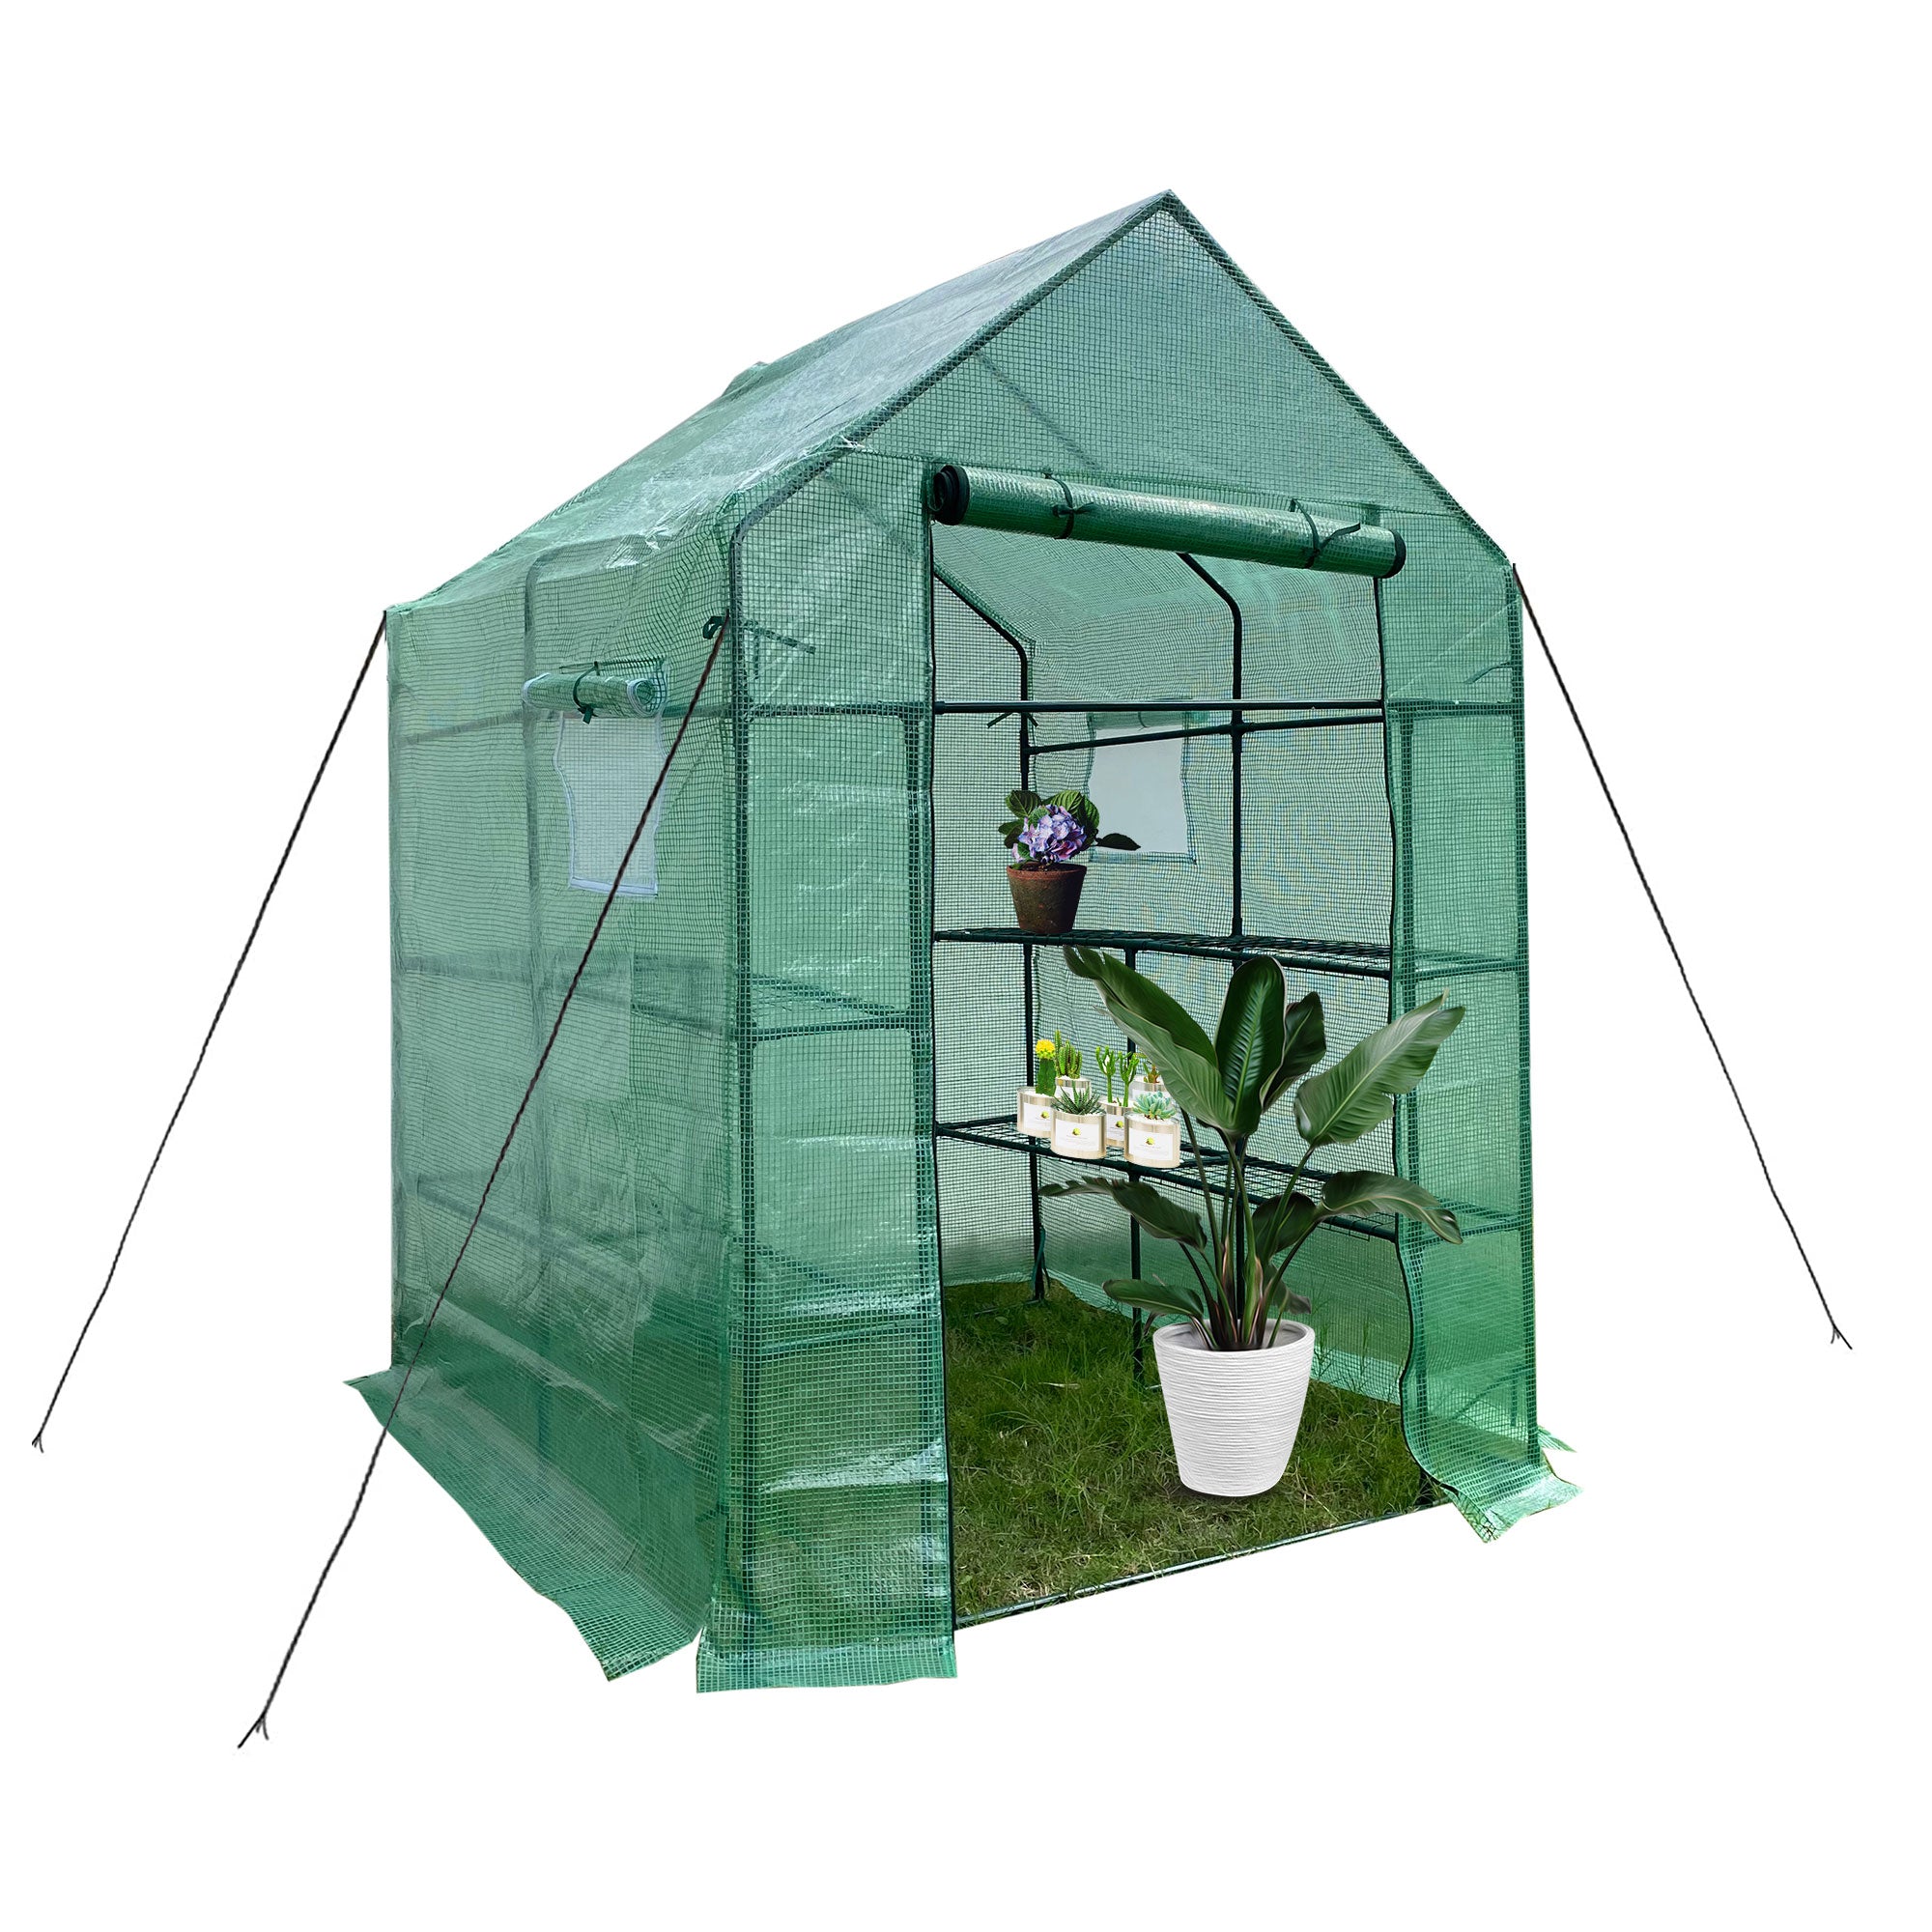 Mini Walk-in Greenhouse Indoor Outdoor -2 Tier 8 Shelves- Portable Plant Gardening Greenhouse, Grow Plant Herbs Flowers Hot House-Boyel Living